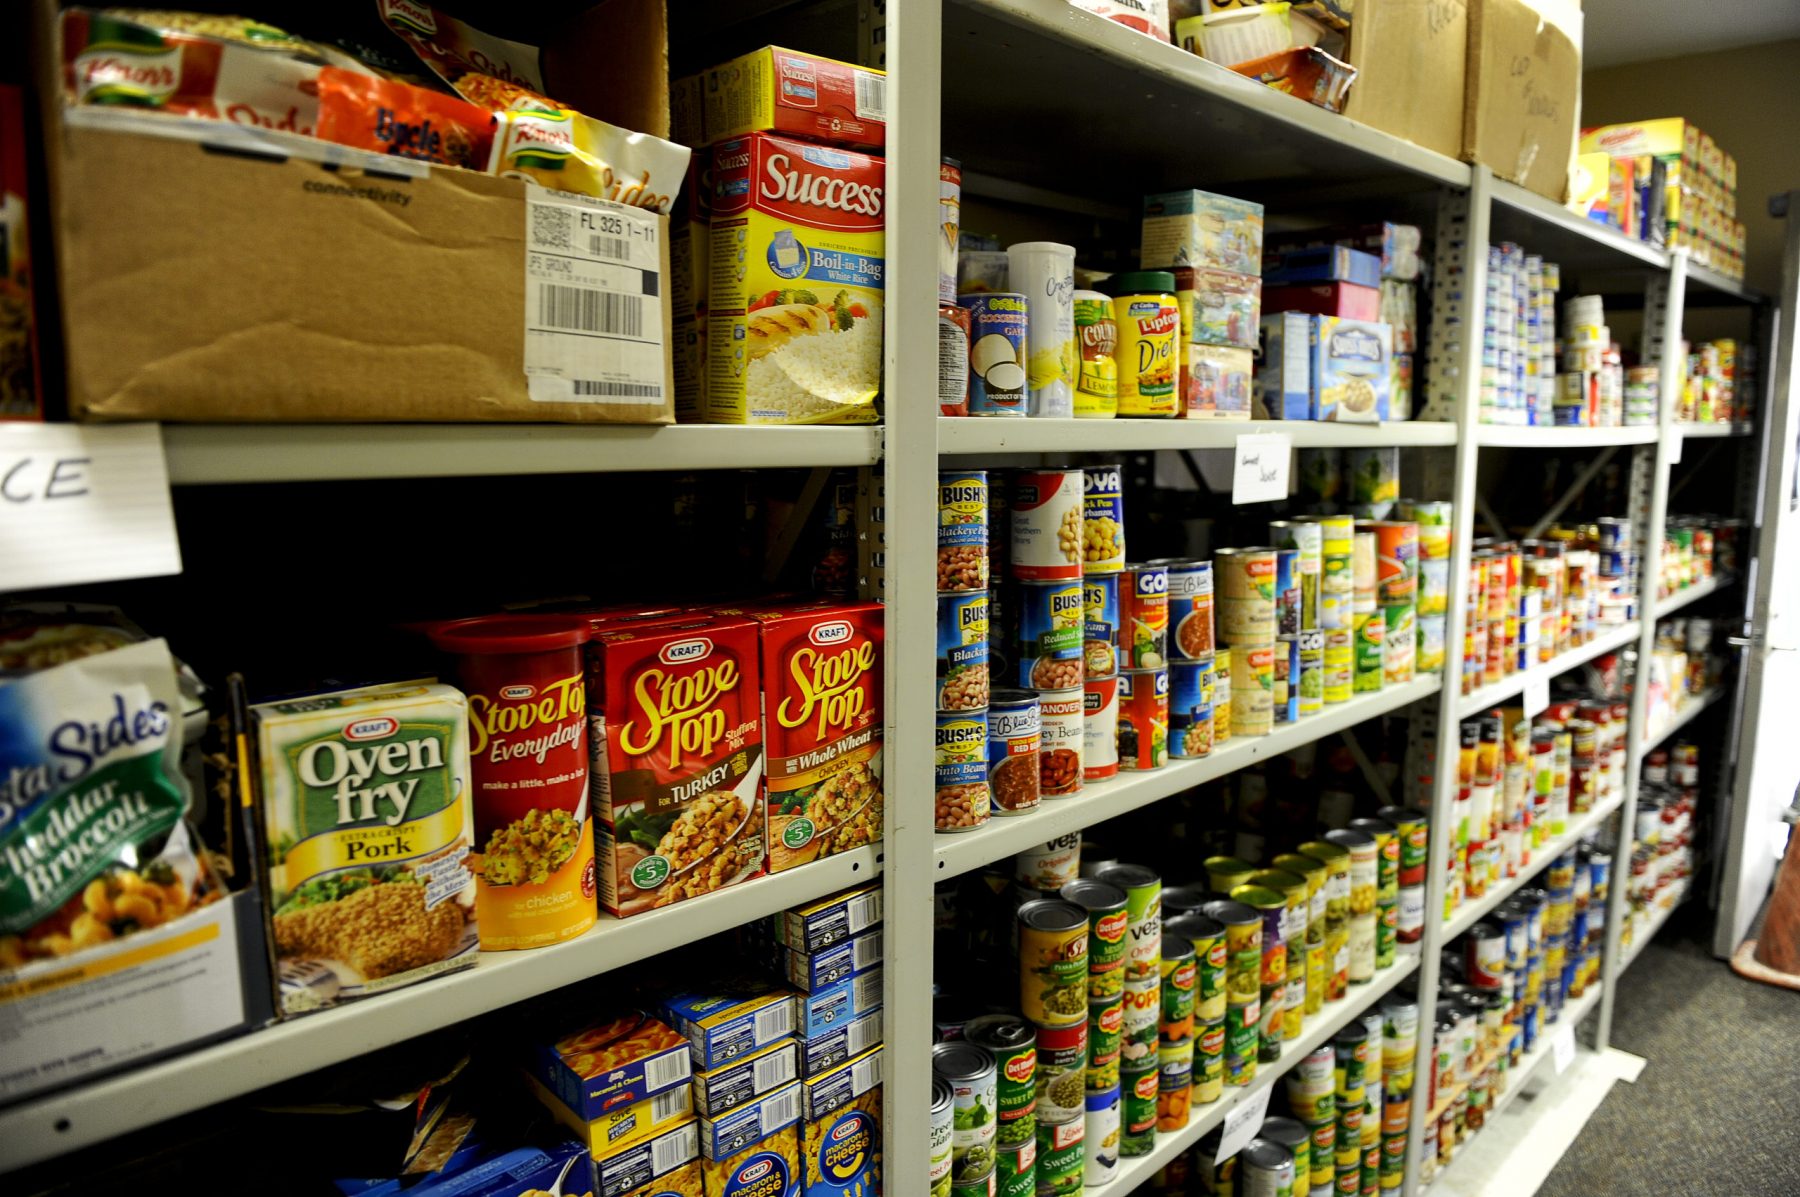 K21 joining other local funders to help stock food pantry organizations